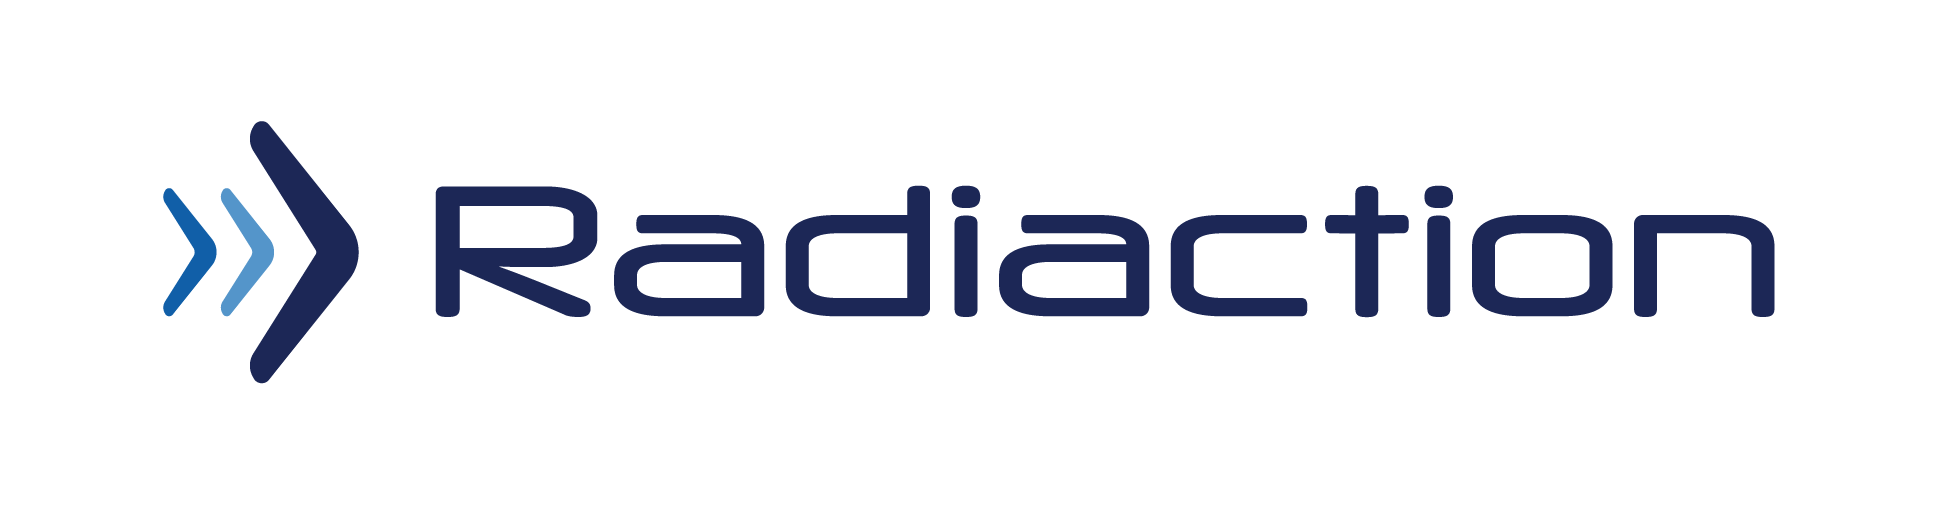 RADIACTION_LOGO_Primary Full Color